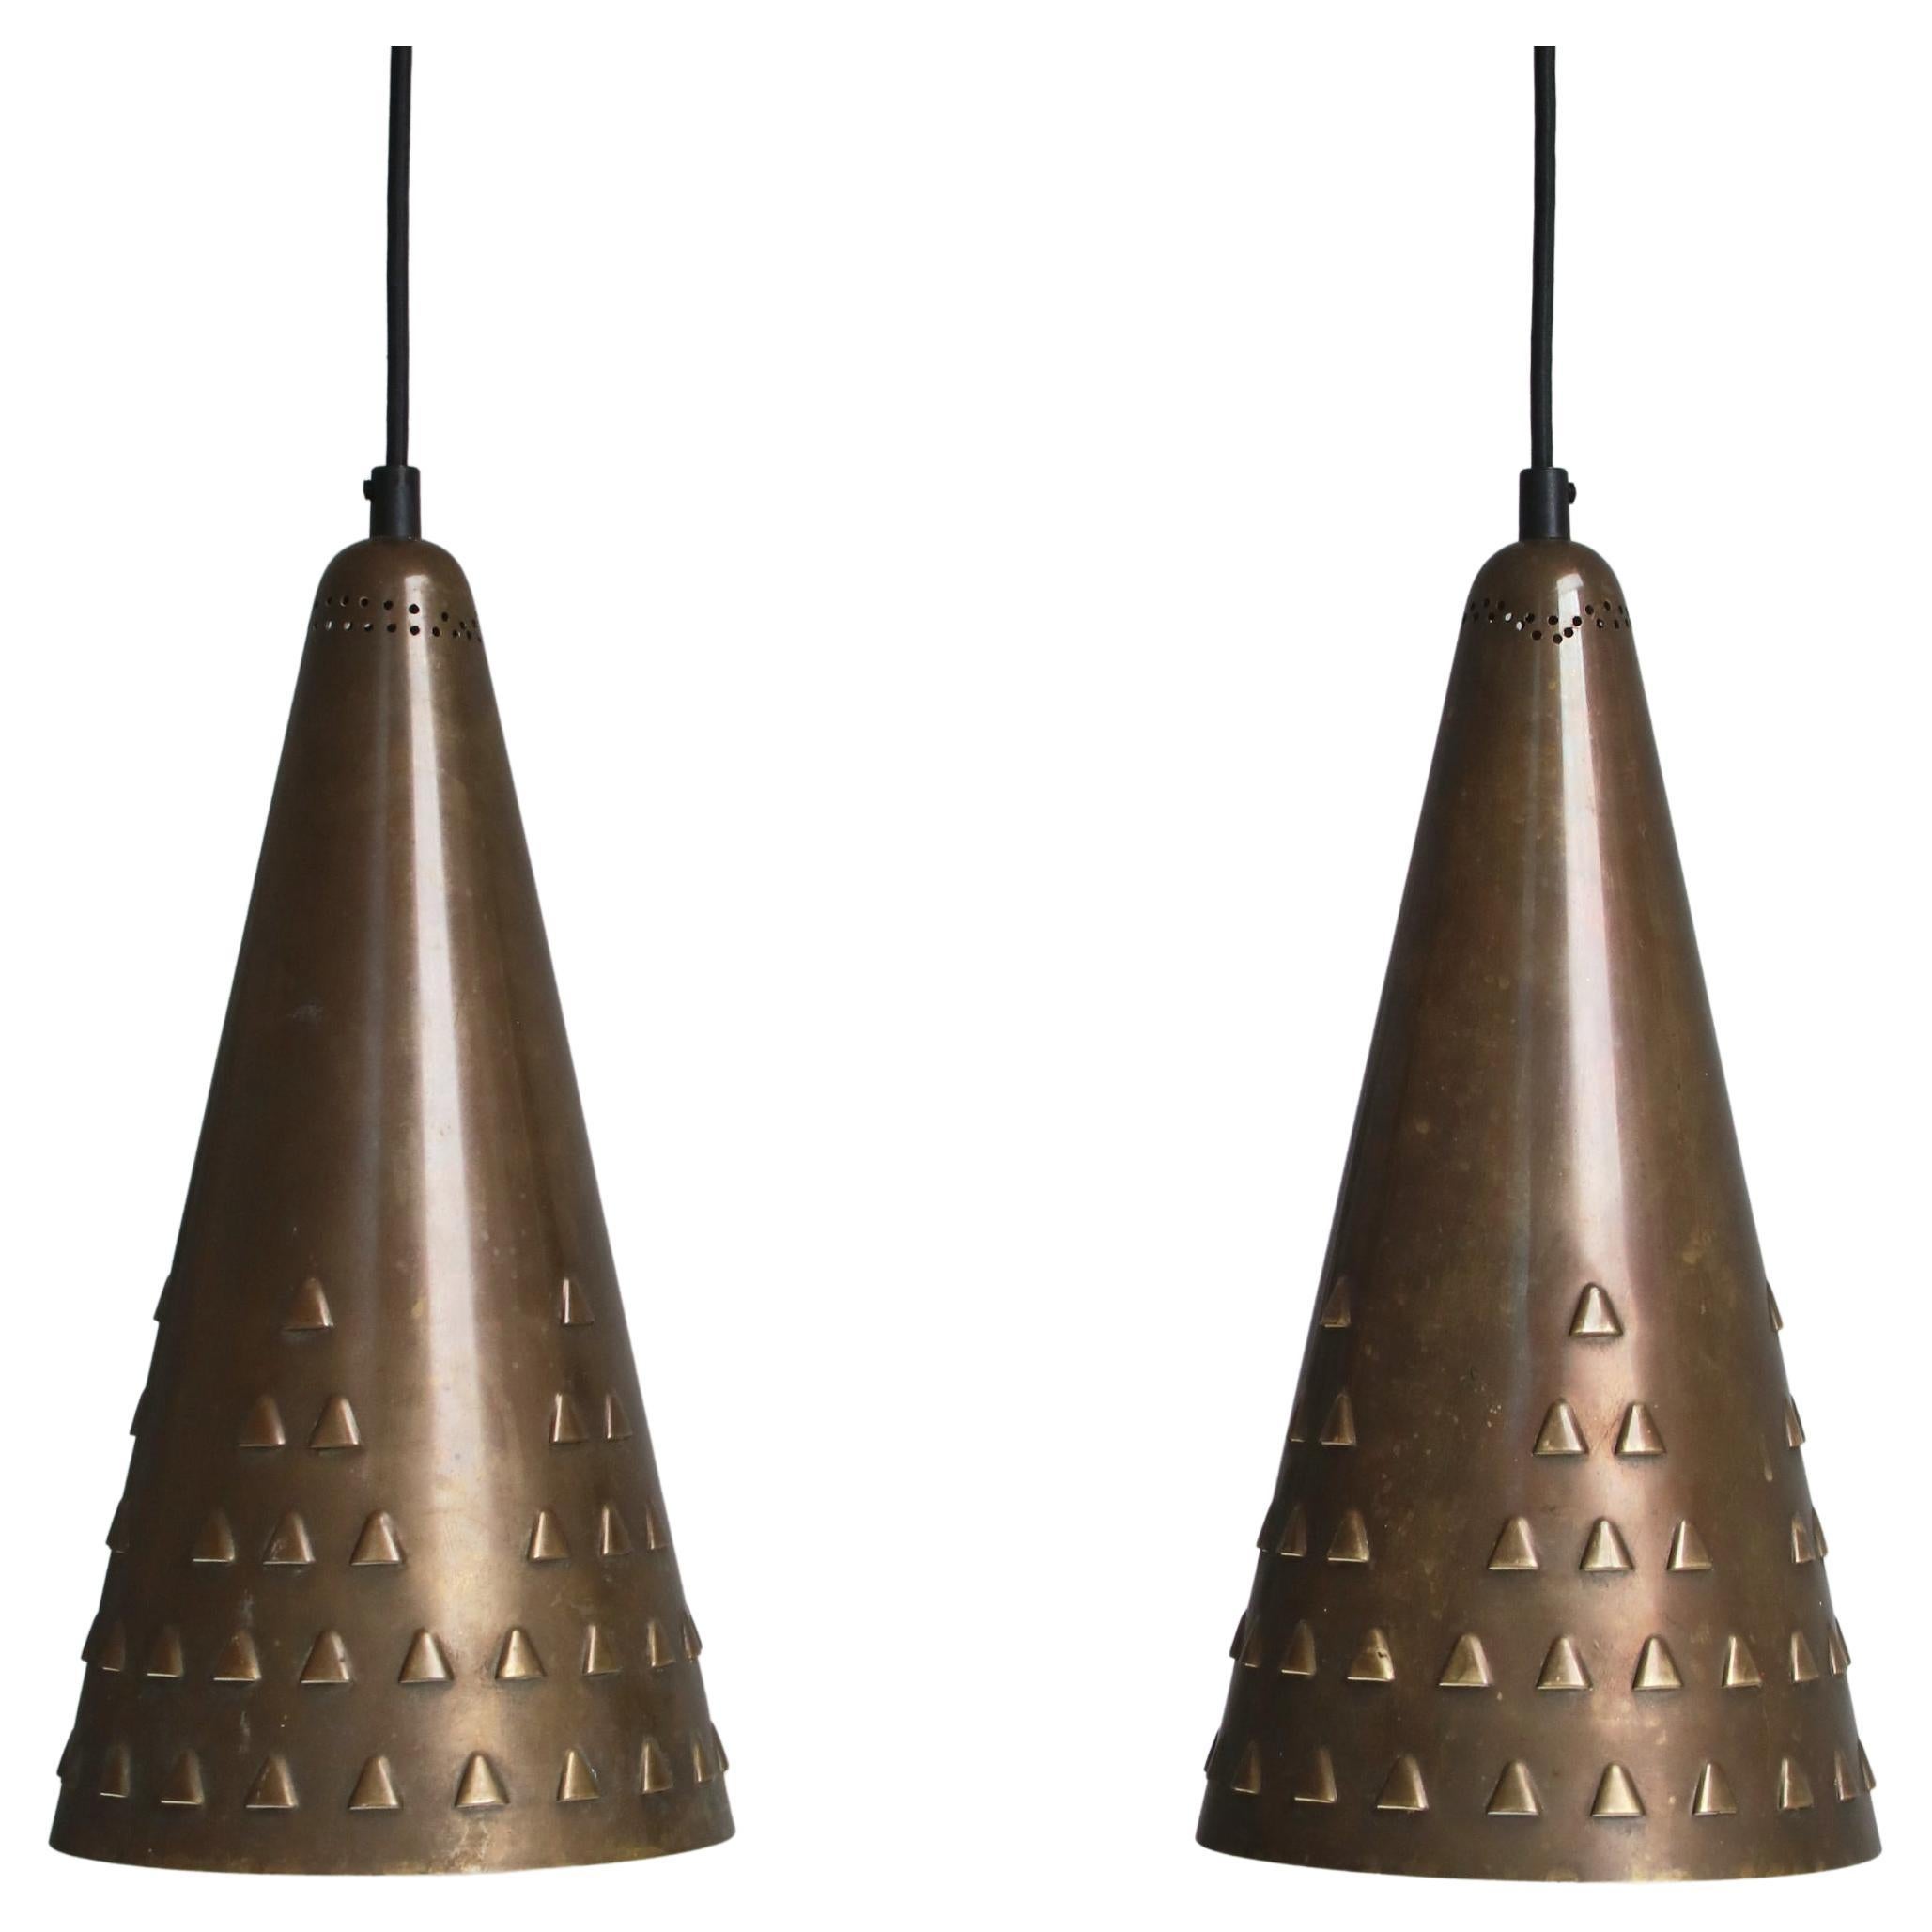 Large Pendants in Patinated Brass by Brockmann-Petersen, Danish Modern, 1953 For Sale